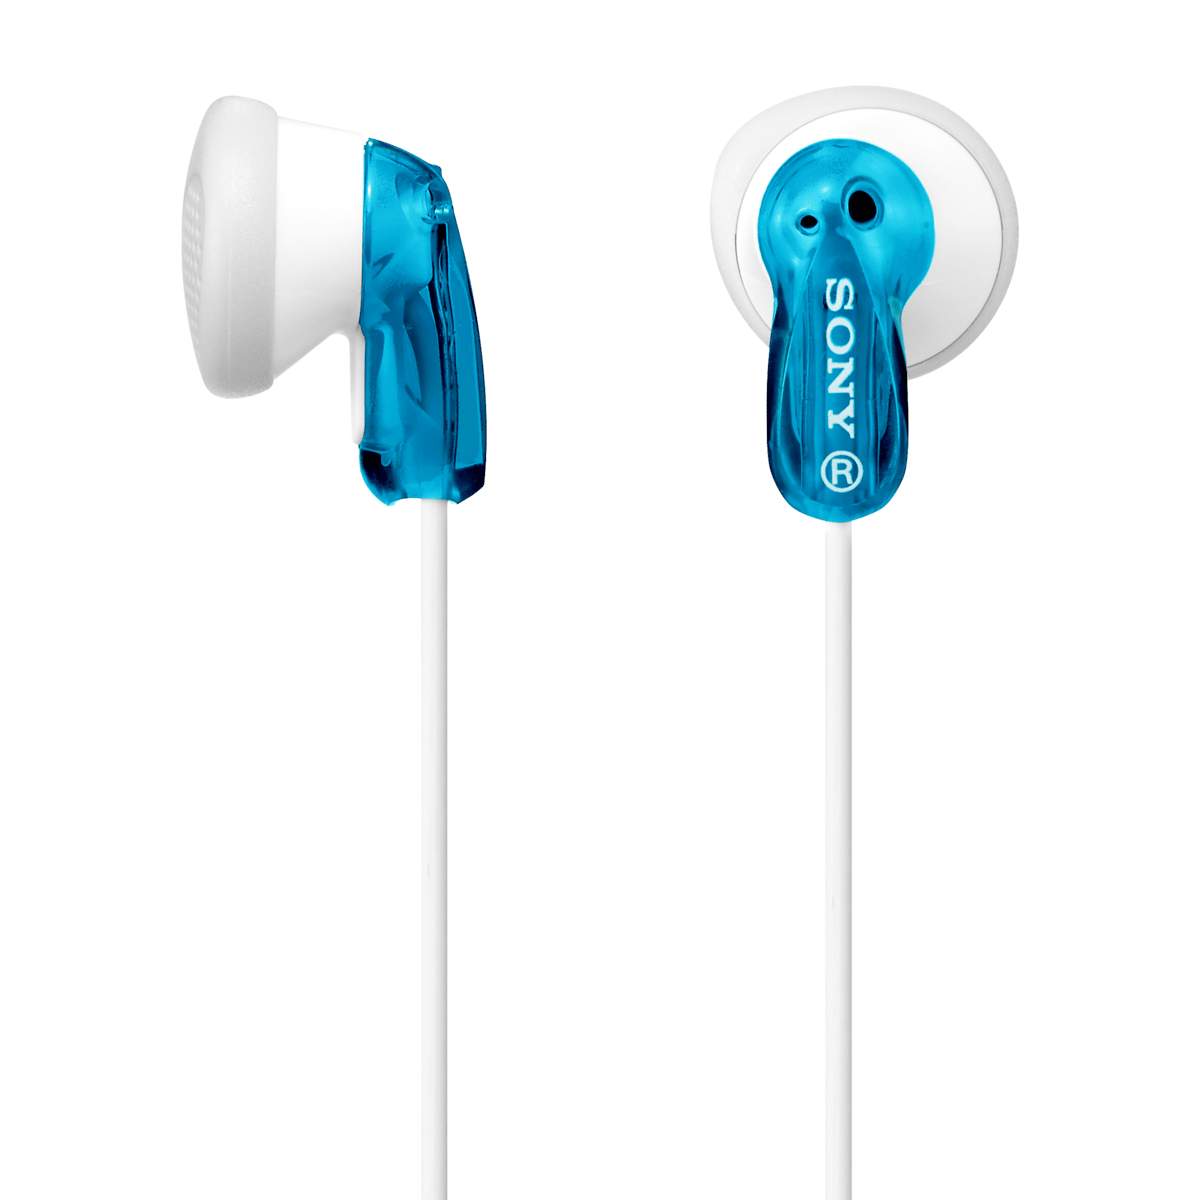 Sony Stereo Earbuds